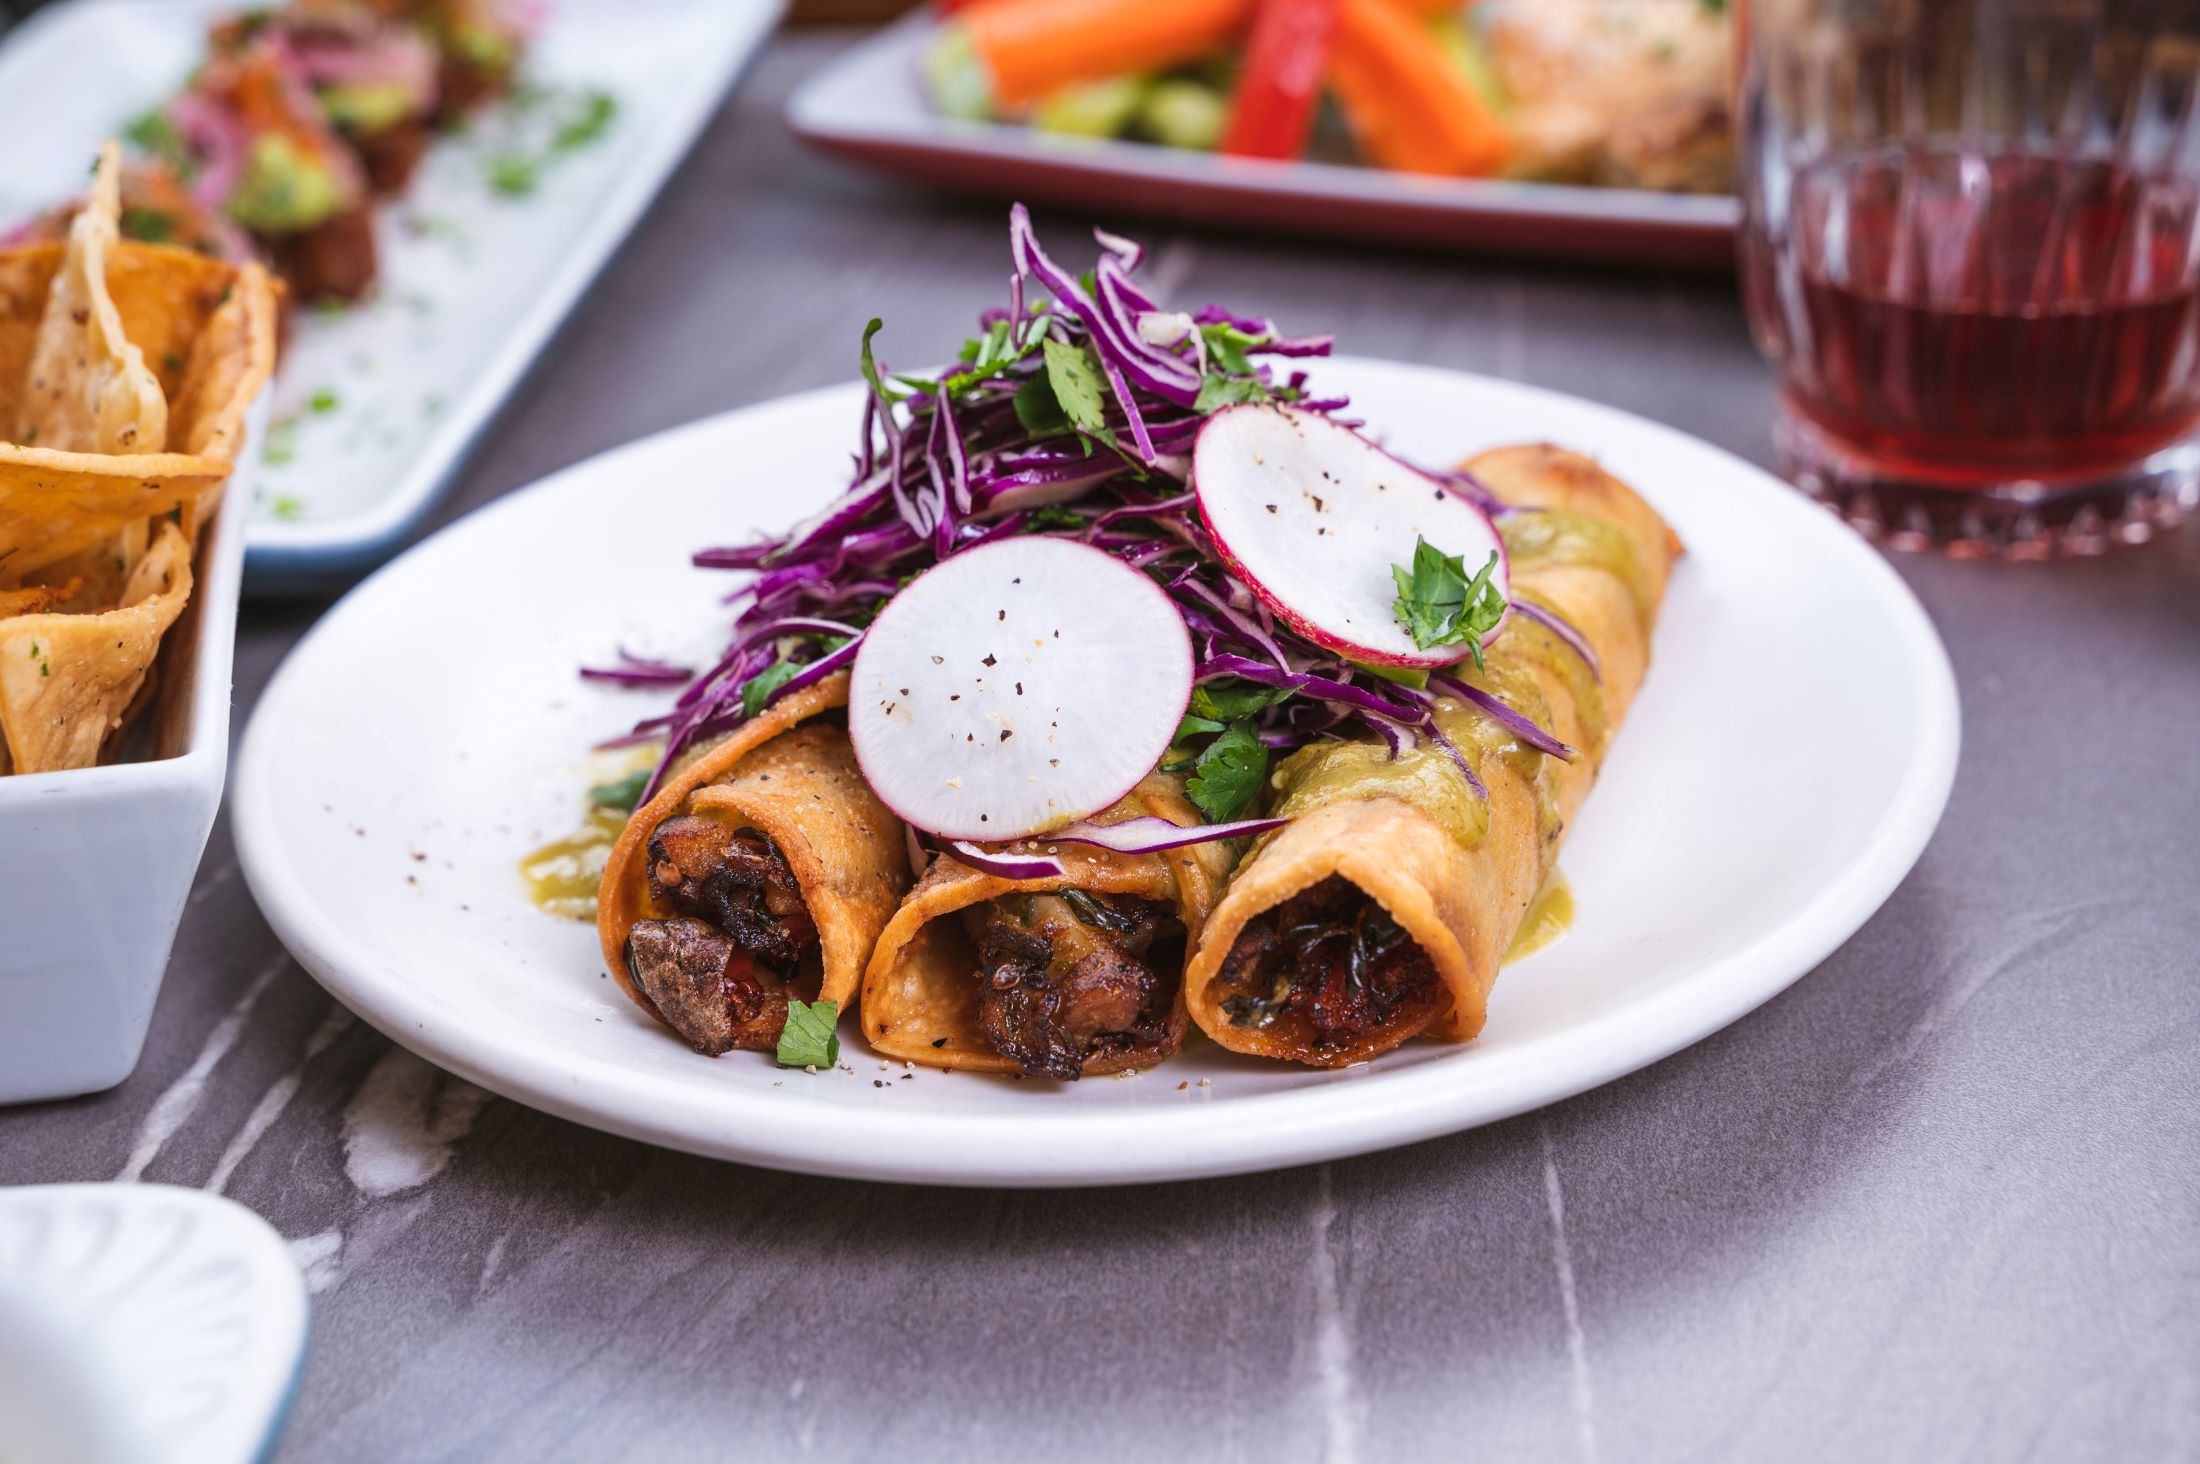 An image of the new Fire Roasted Eggplant Taquitos from Lemon Poppy Kitchen.